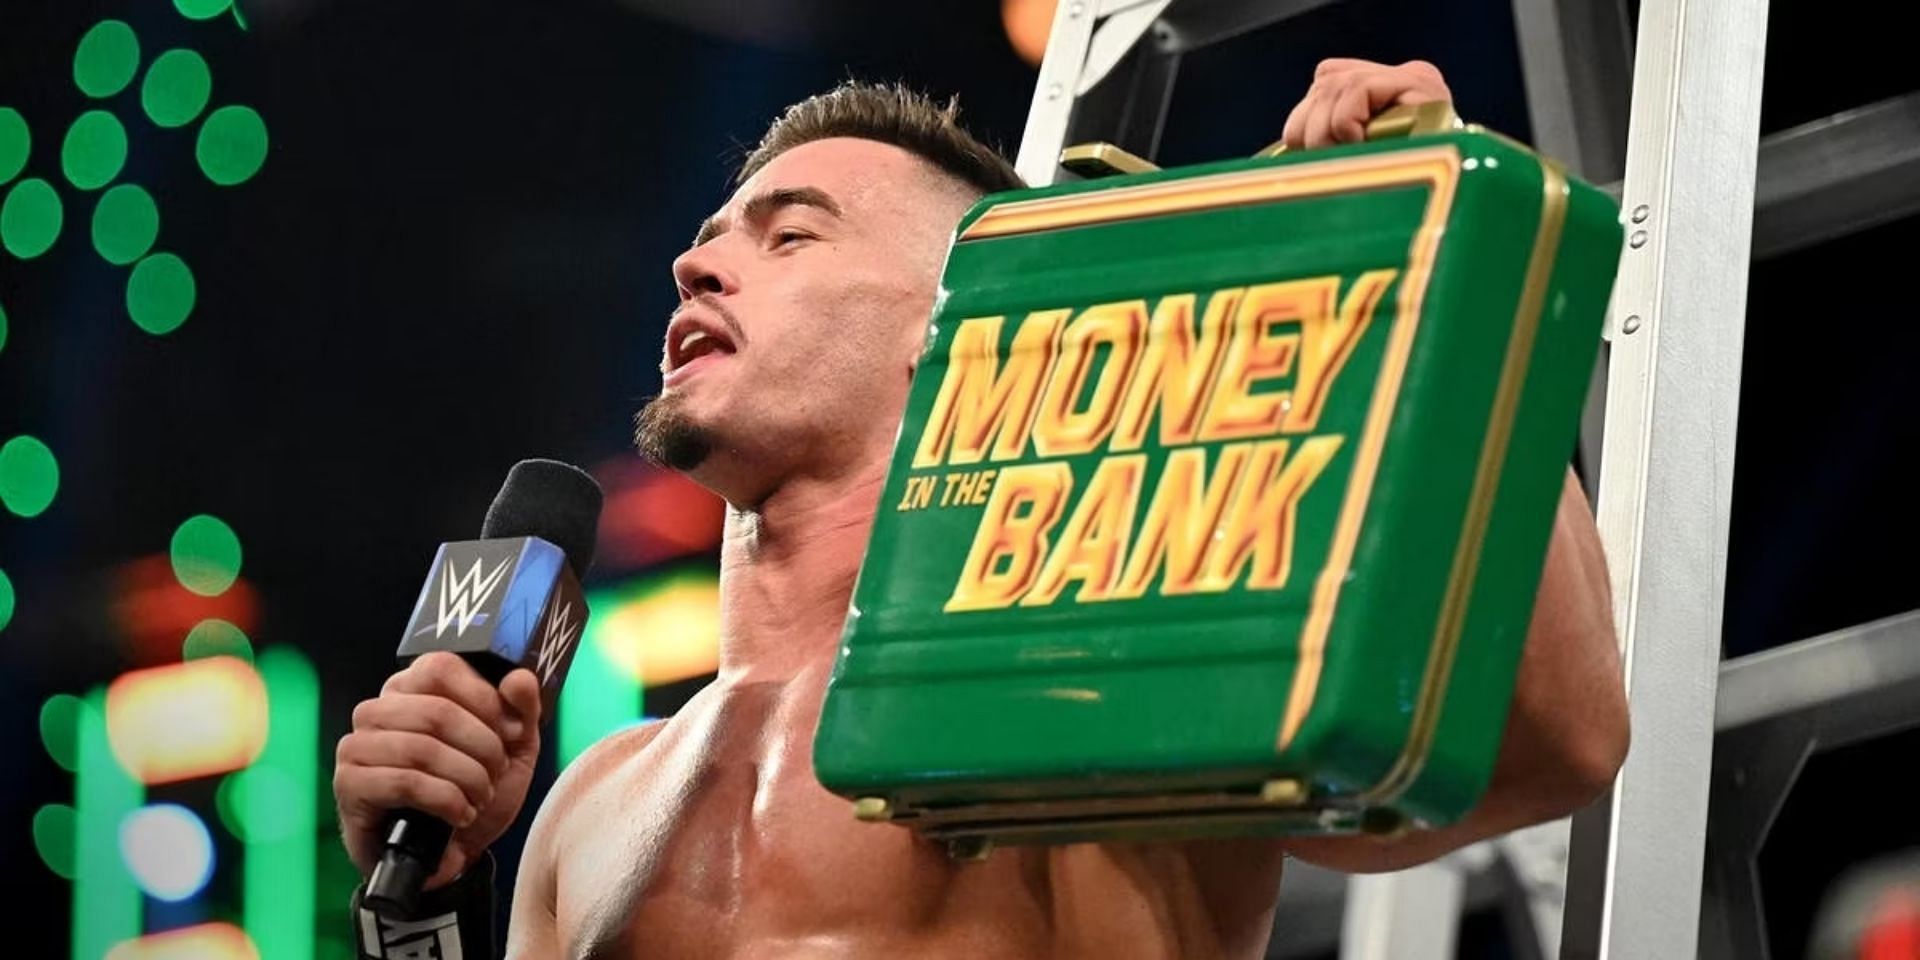 The 24-year-old star is currently Mr. Money In The Bank.